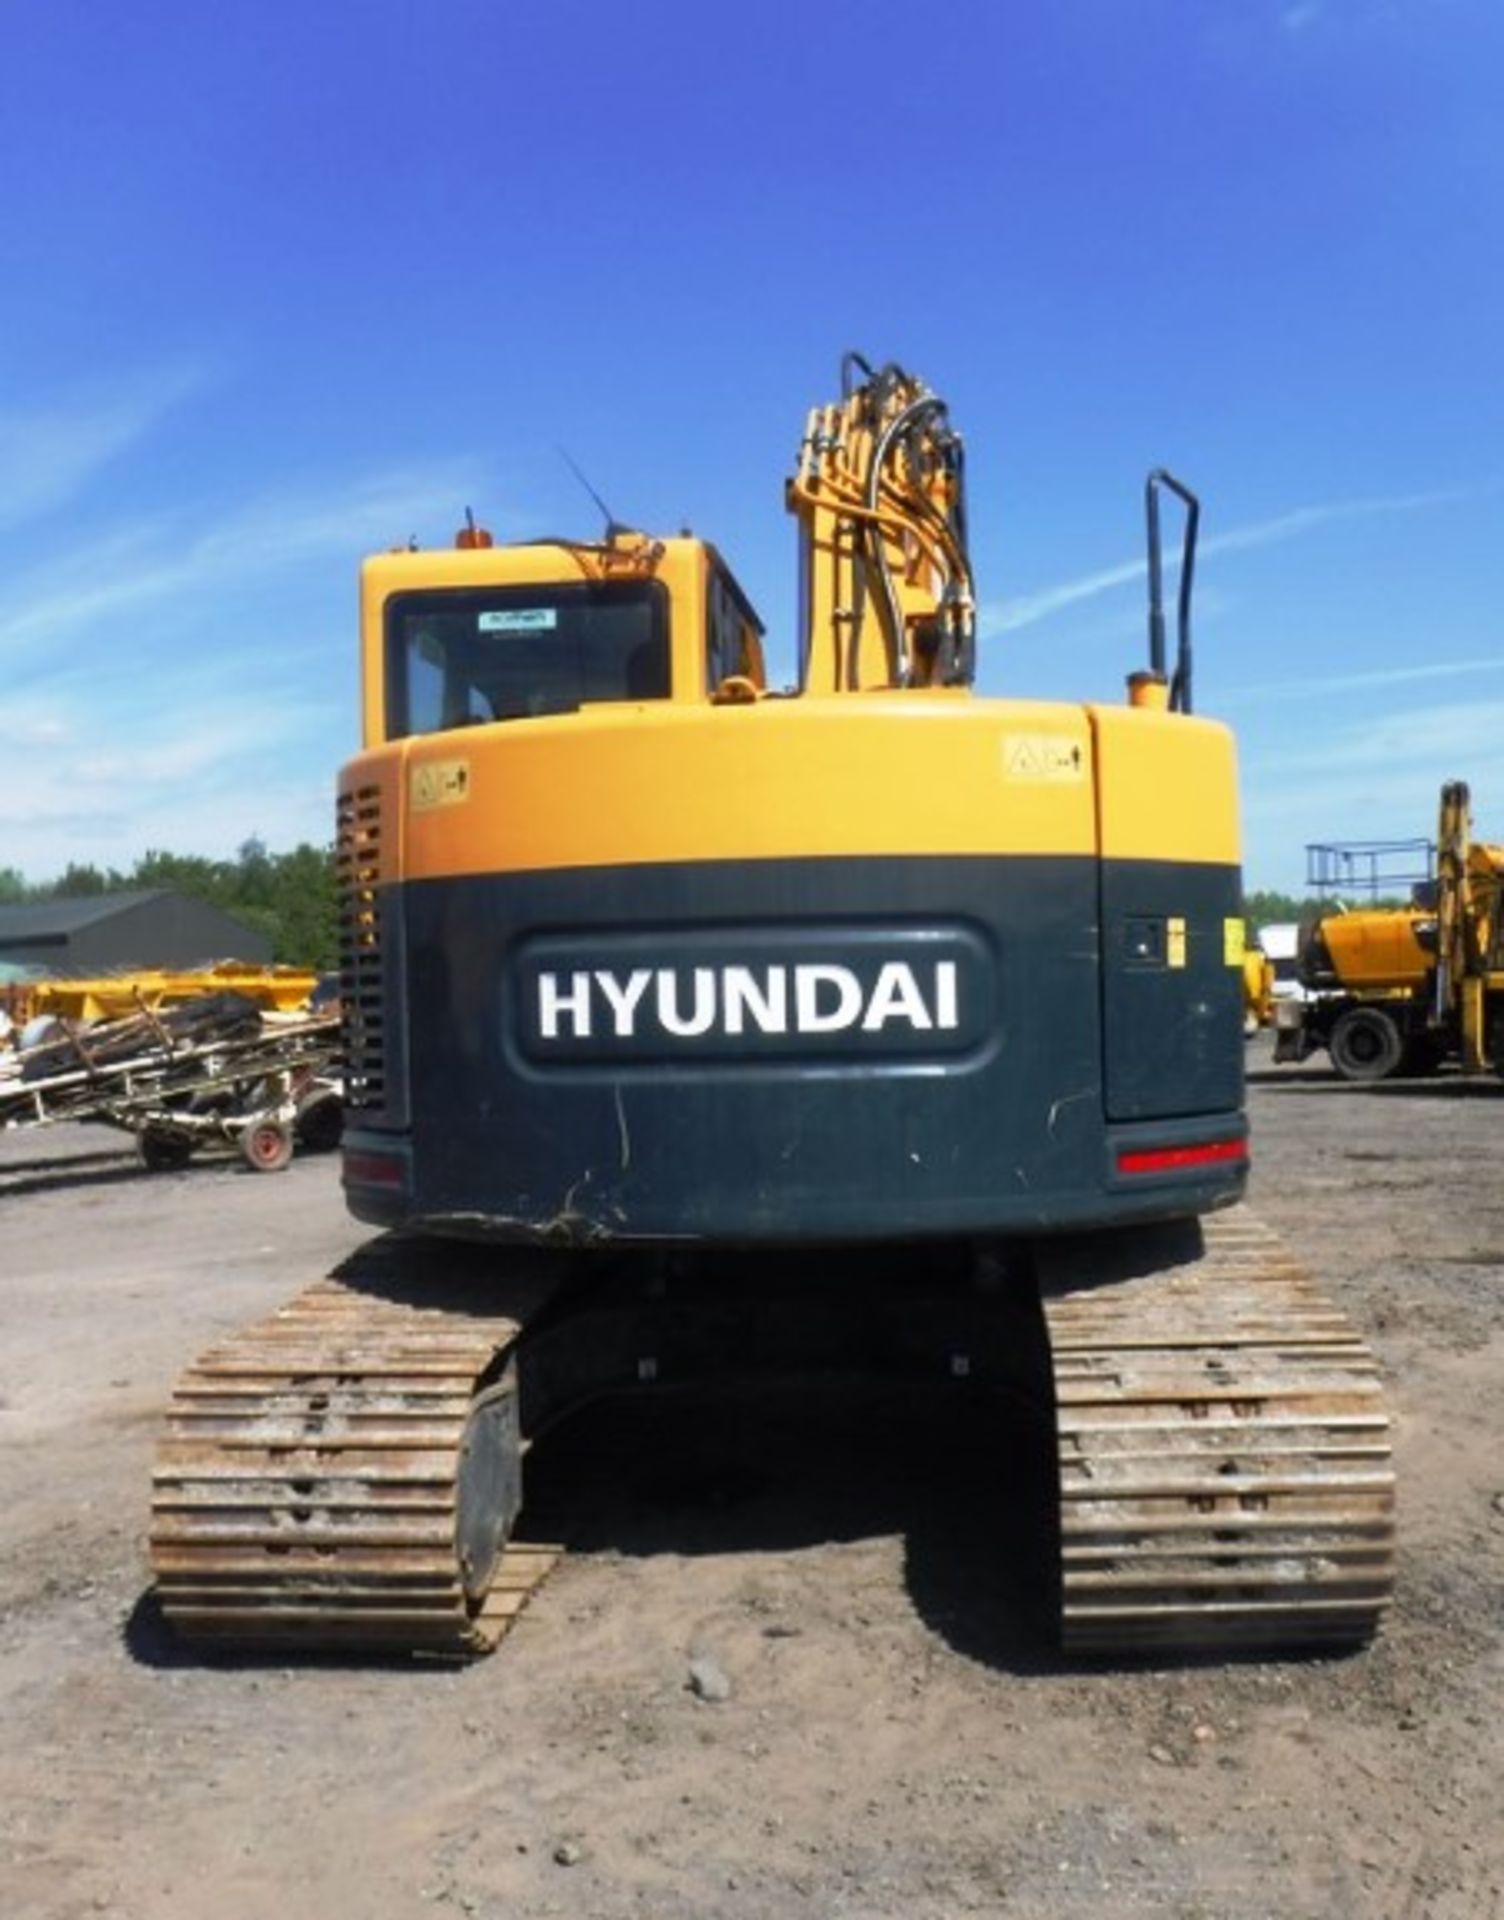 2014 HYUNDAI 145-9A excavator c/w 1 bucket. Short body version ideal for site work. s/n 068. 4263hr - Image 27 of 32